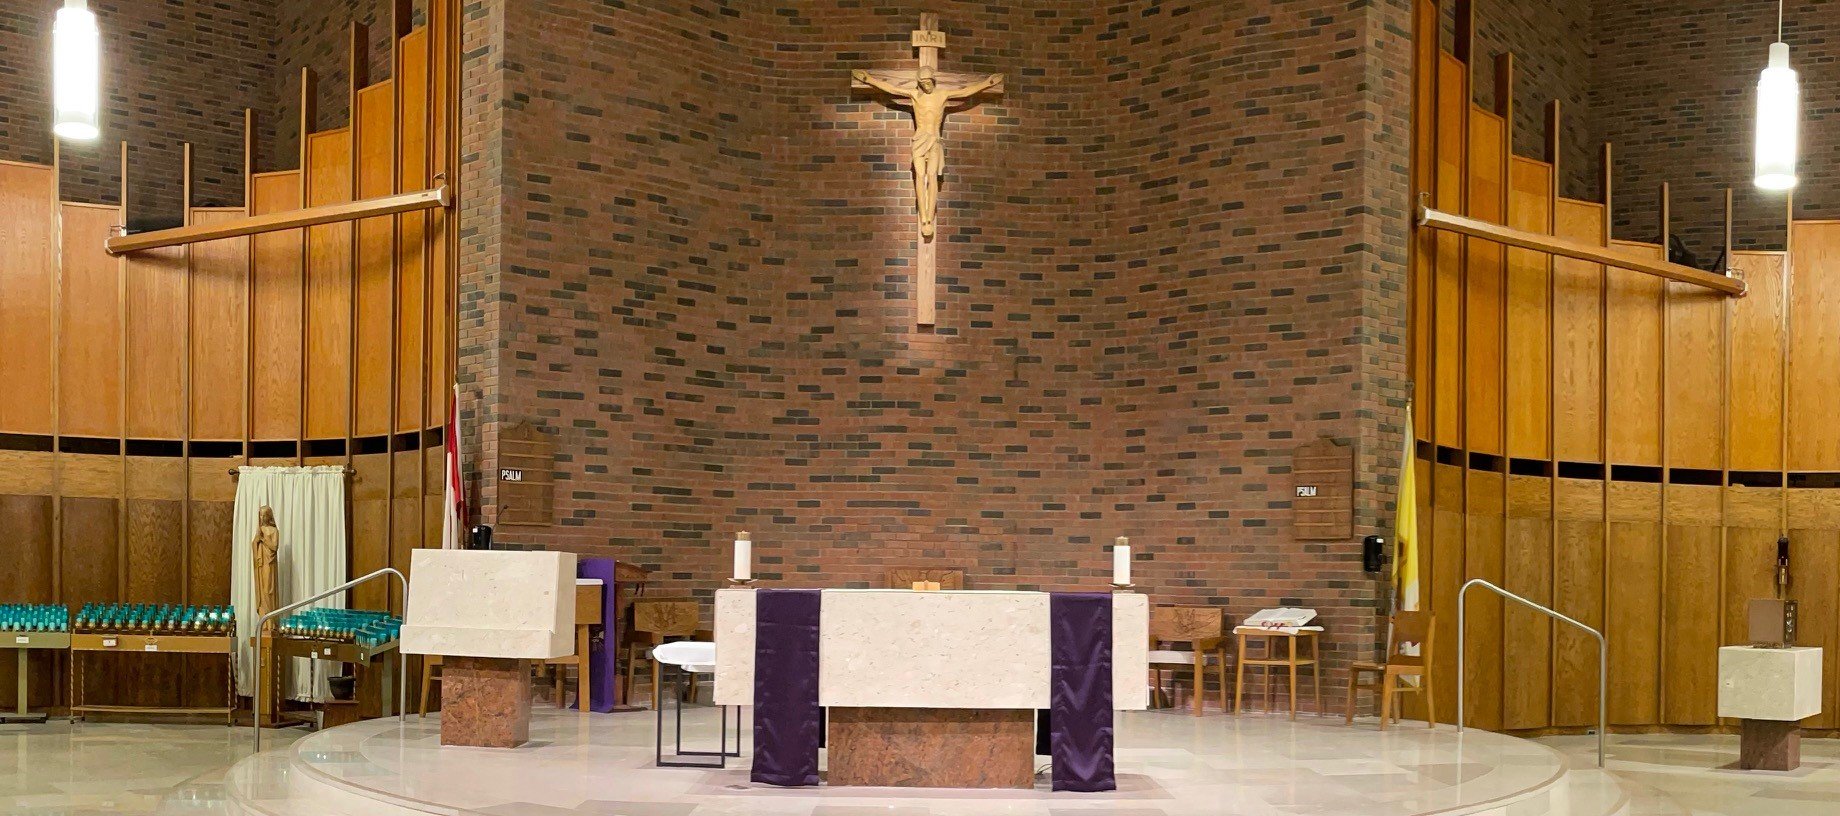 St. Mary's Church Interior in Lent 2021